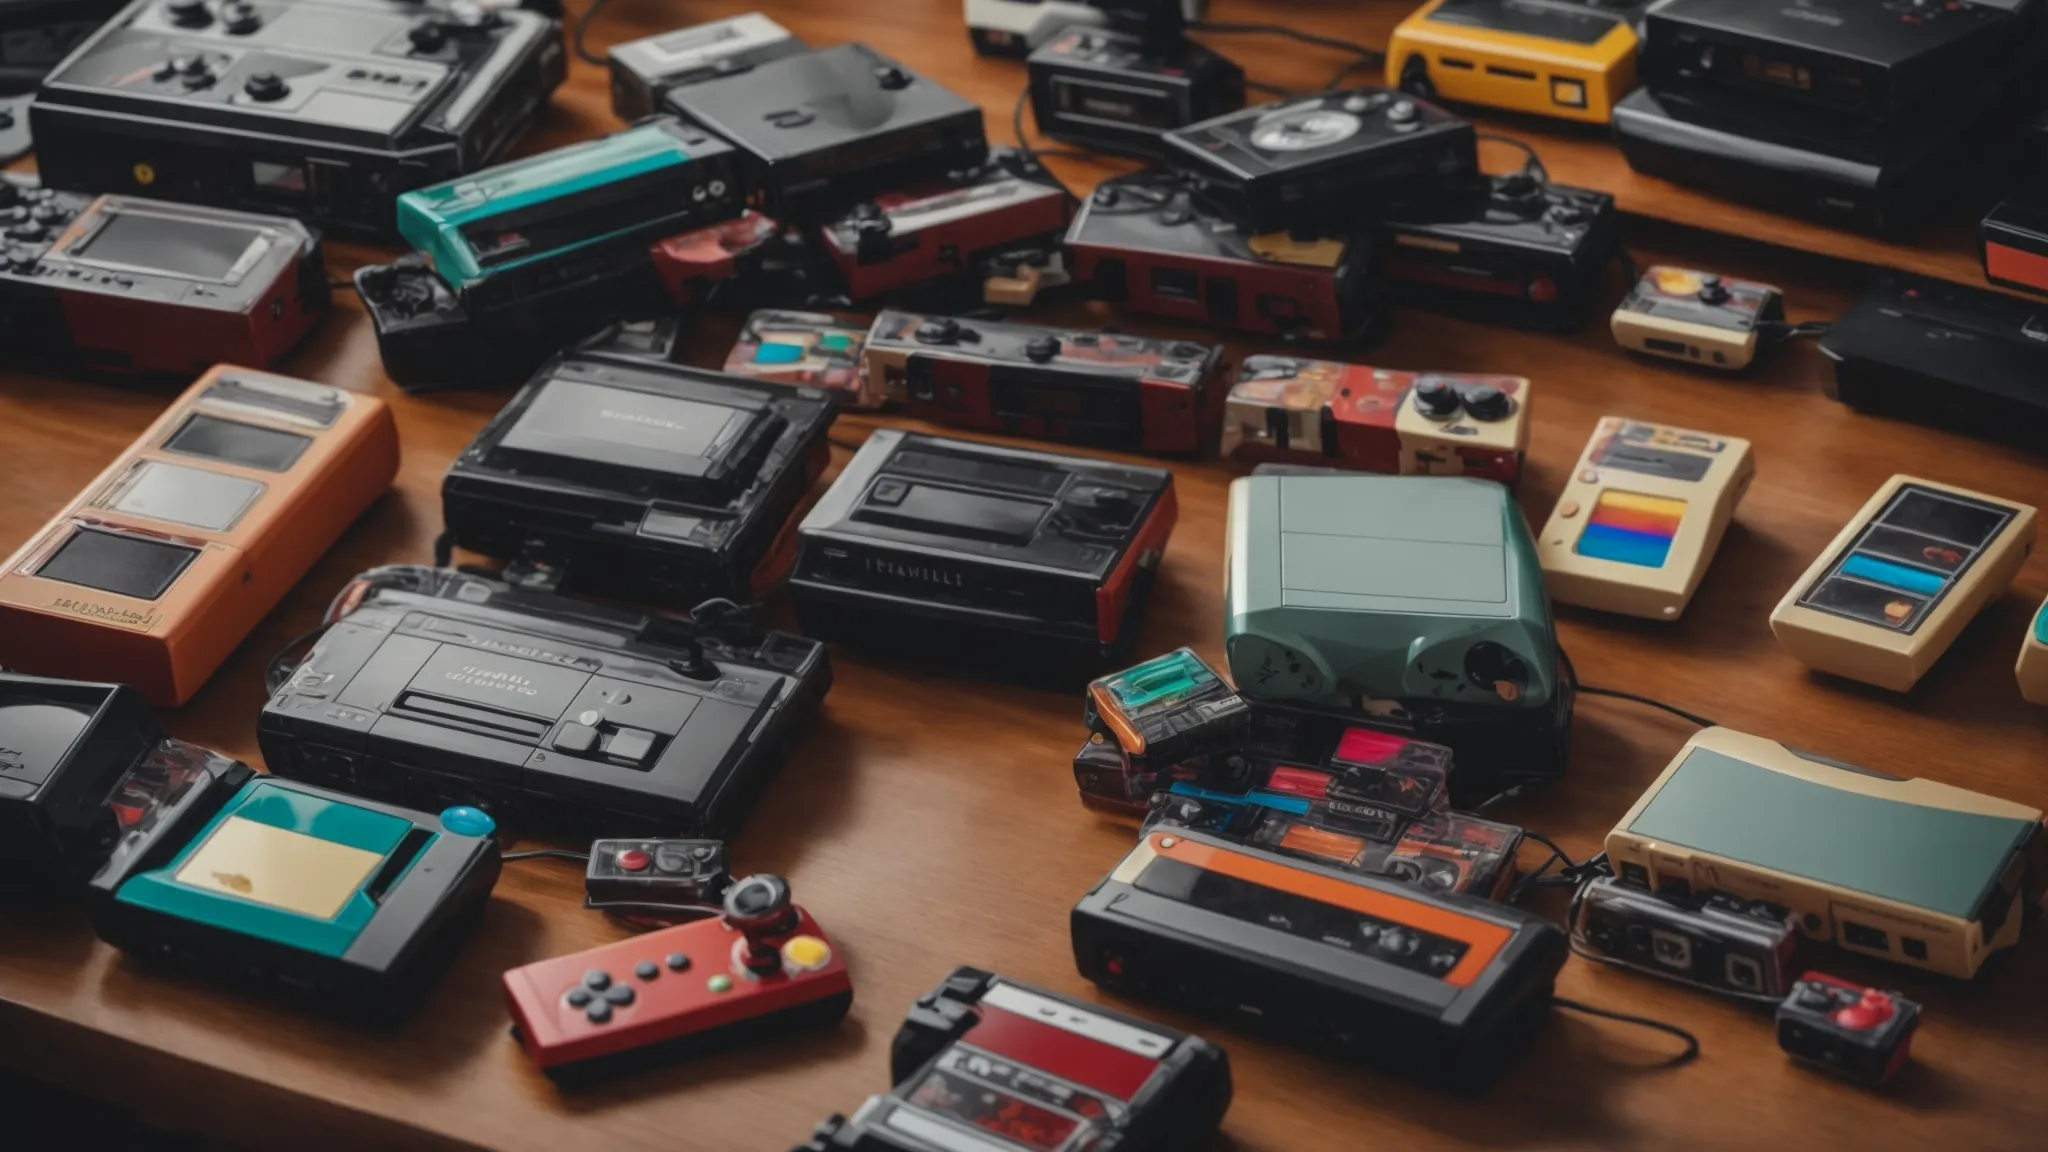 a colorful collection of various retro gaming consoles and cartridges spread across a wooden table.